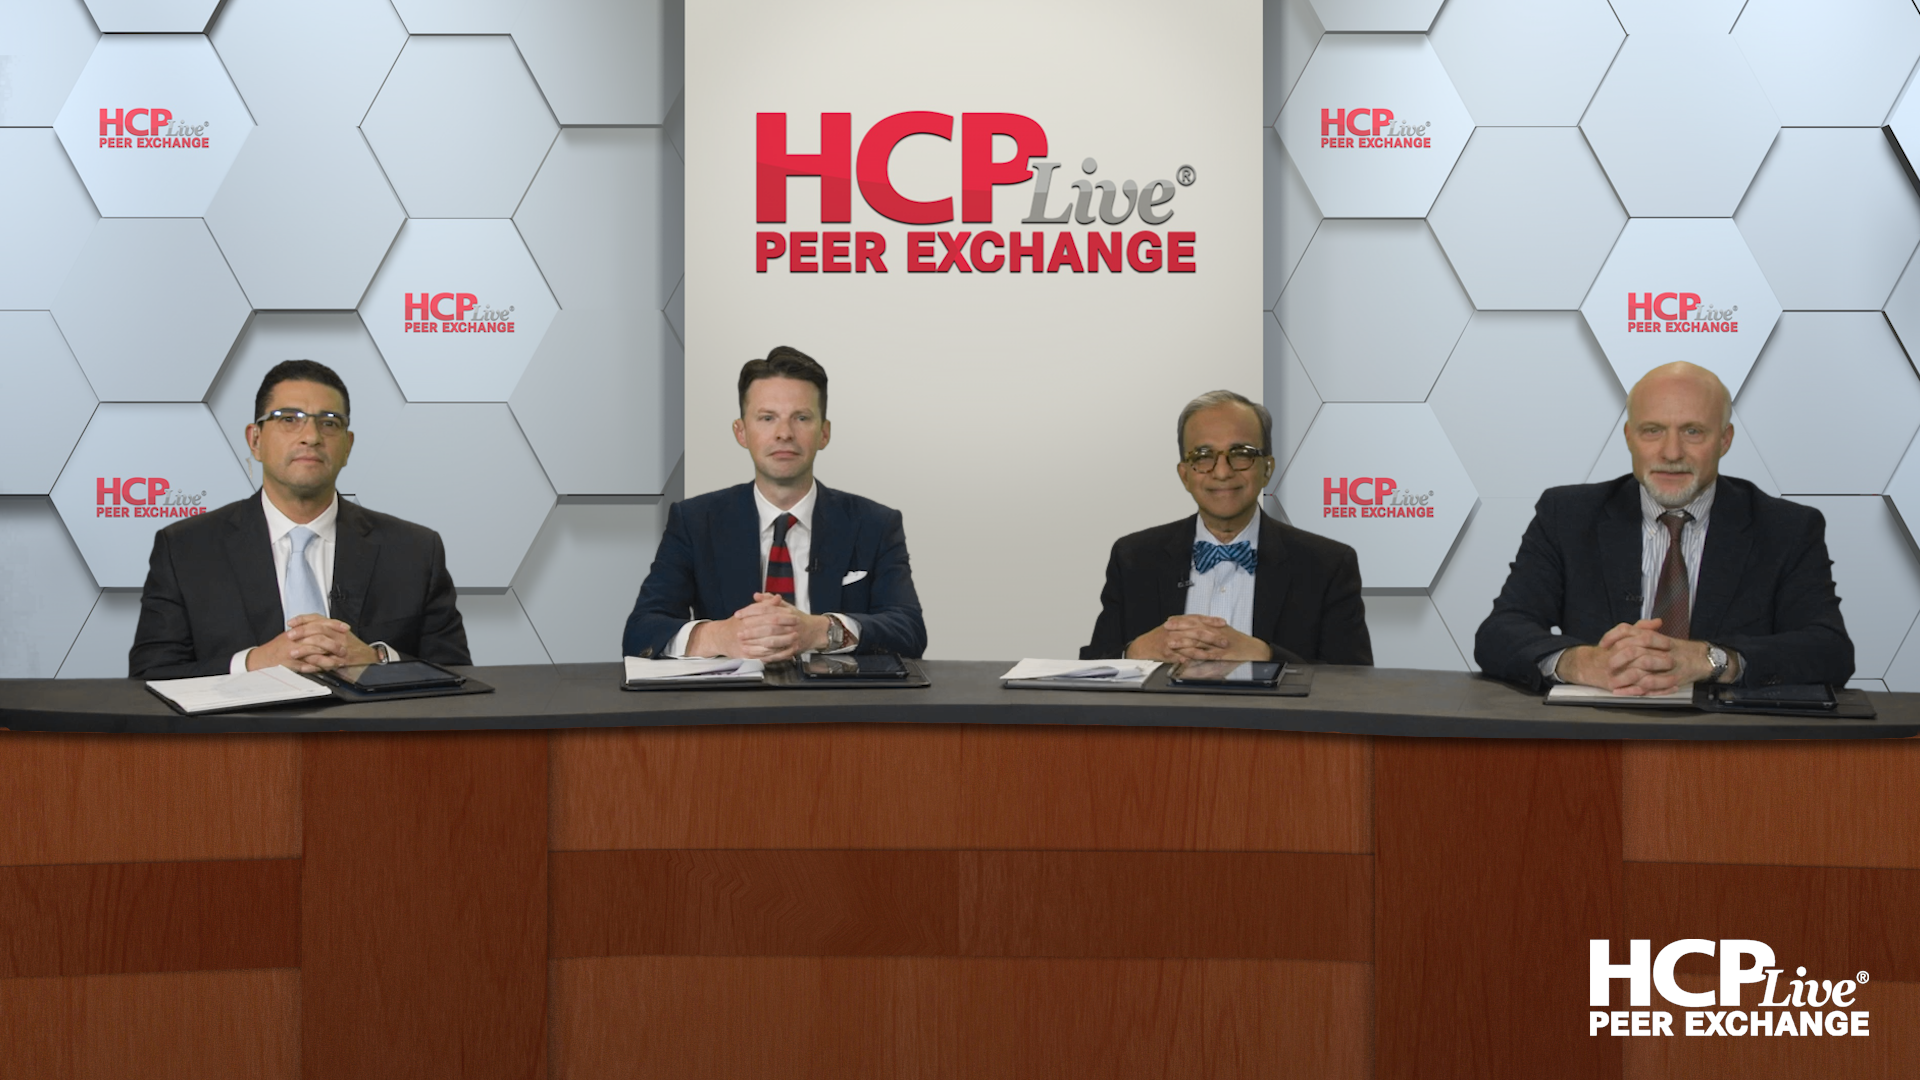 Treatment Selection for Patients With PBC